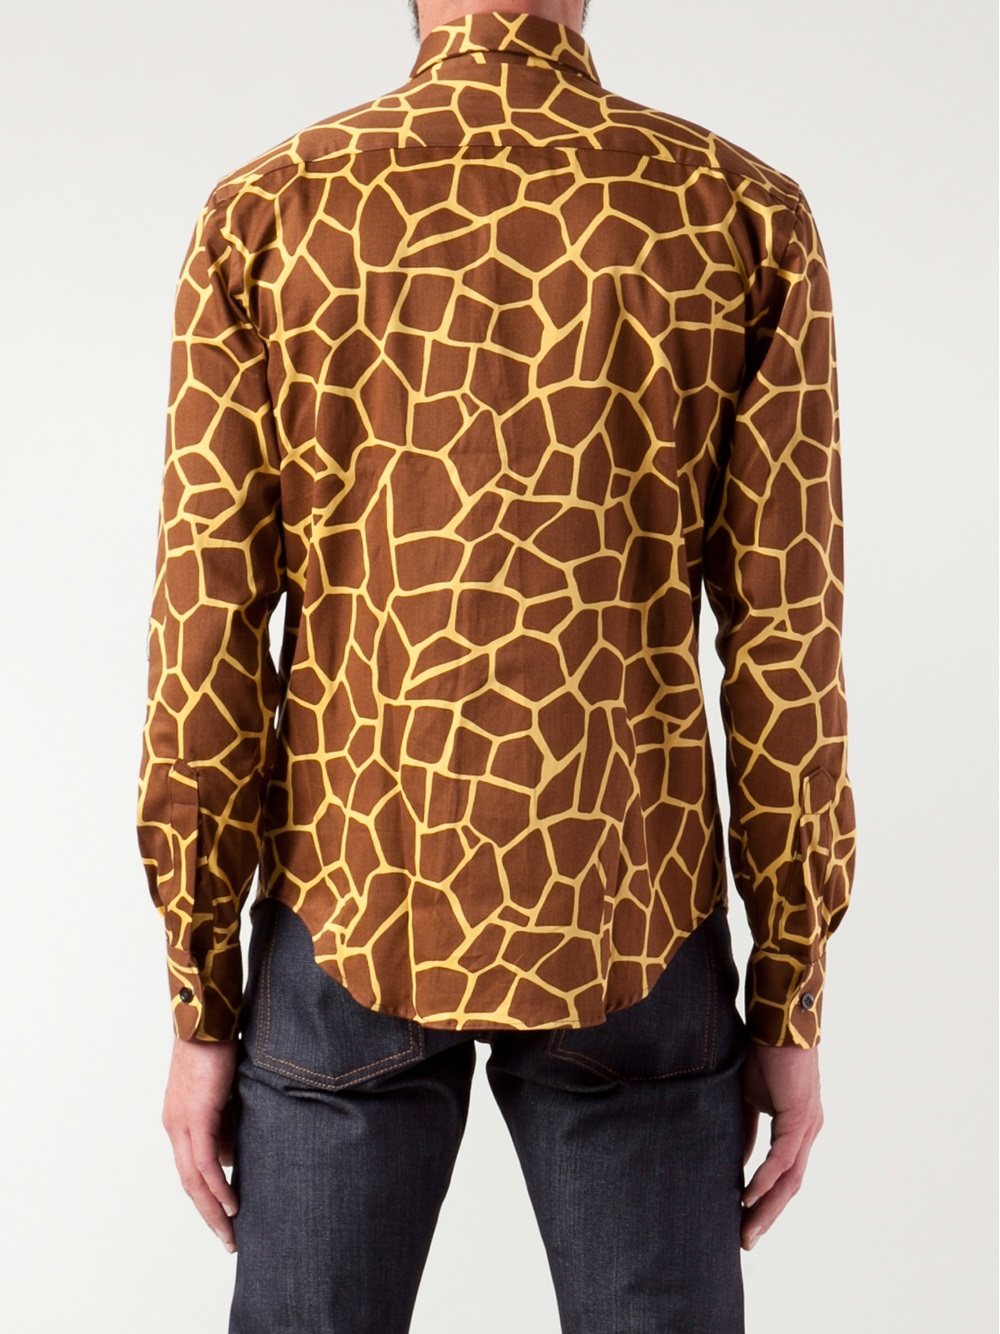 Giraffe Pictures To Print : Shirt Giraffe Naked Famous Brown Lyst ...